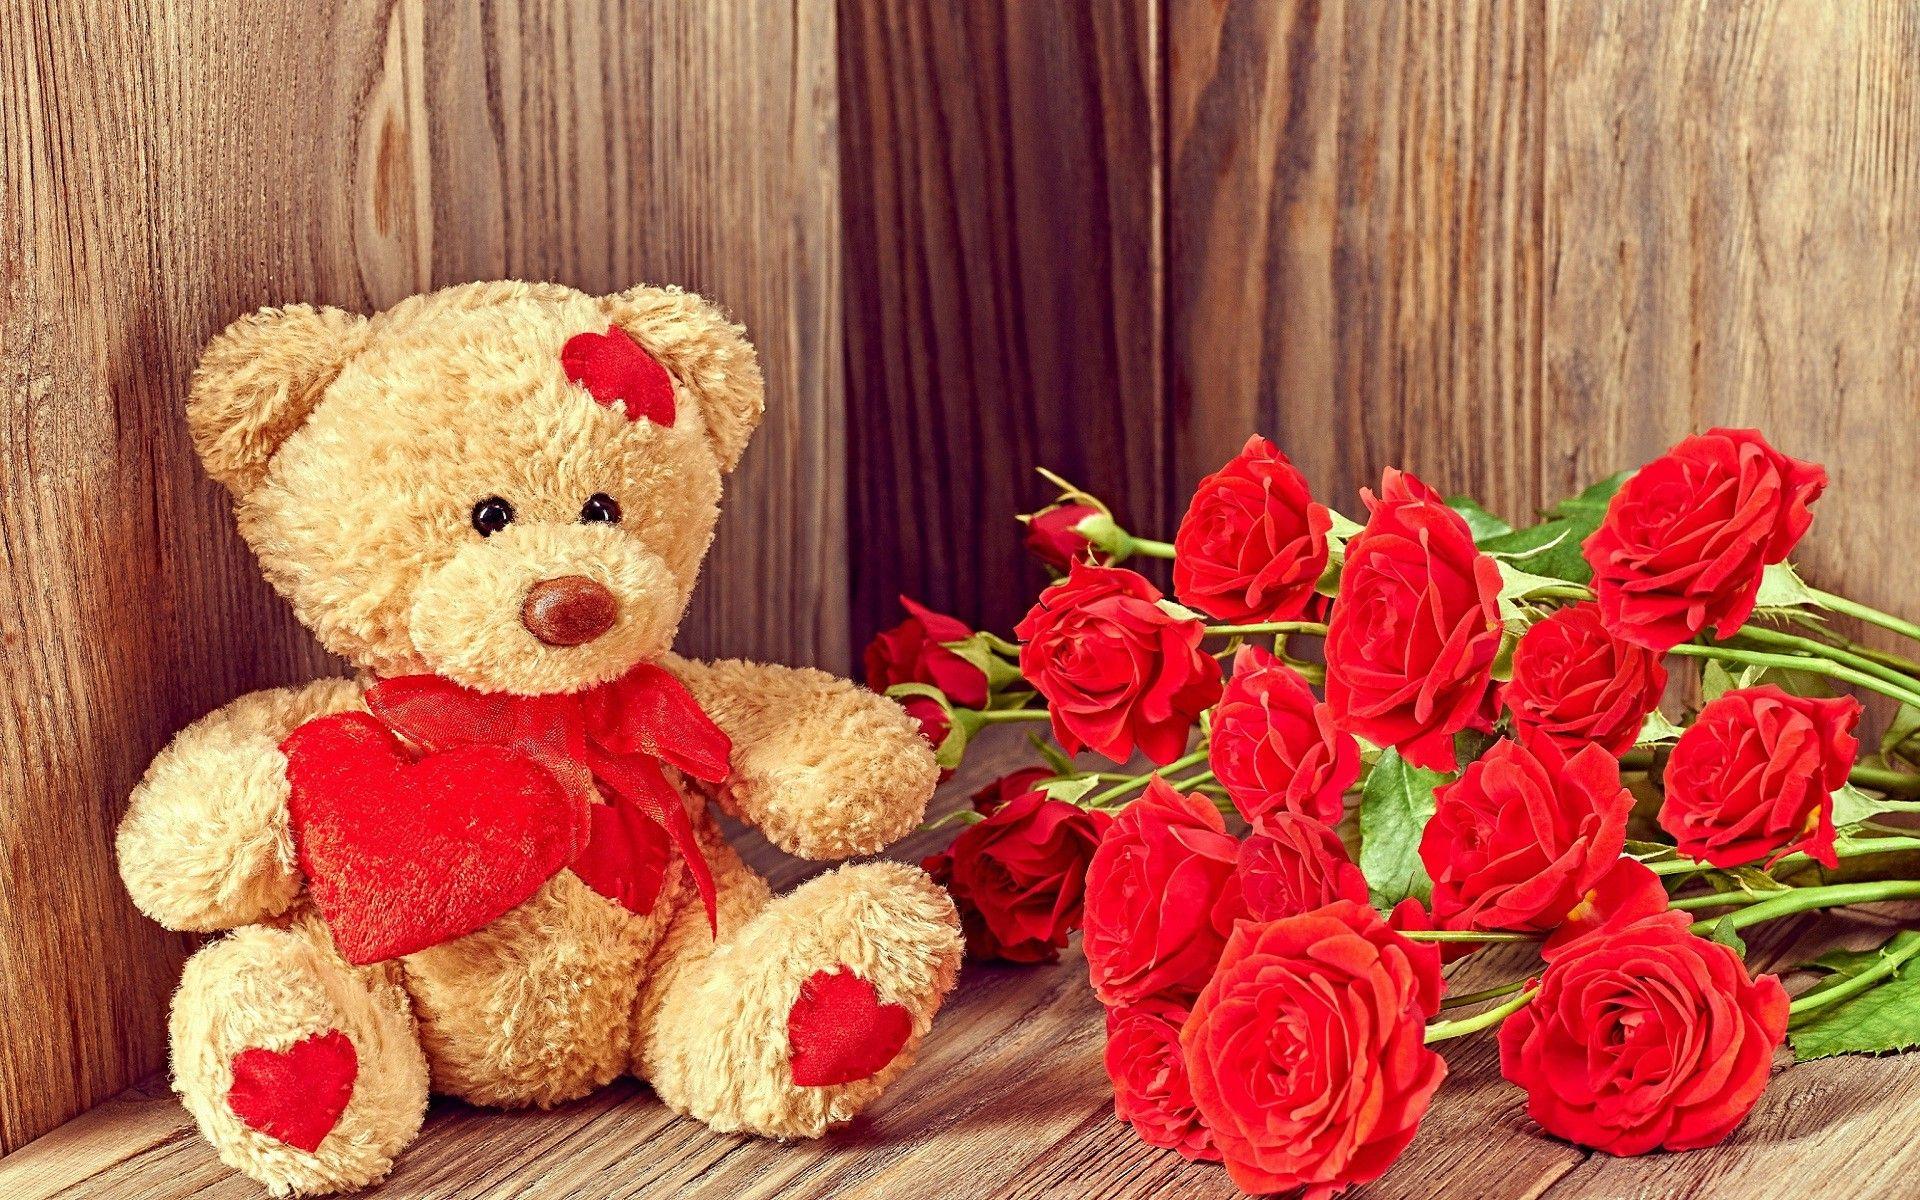 I Love You Teddy Bear Wallpapers | HD Wallpapers - Wallpaper Cave